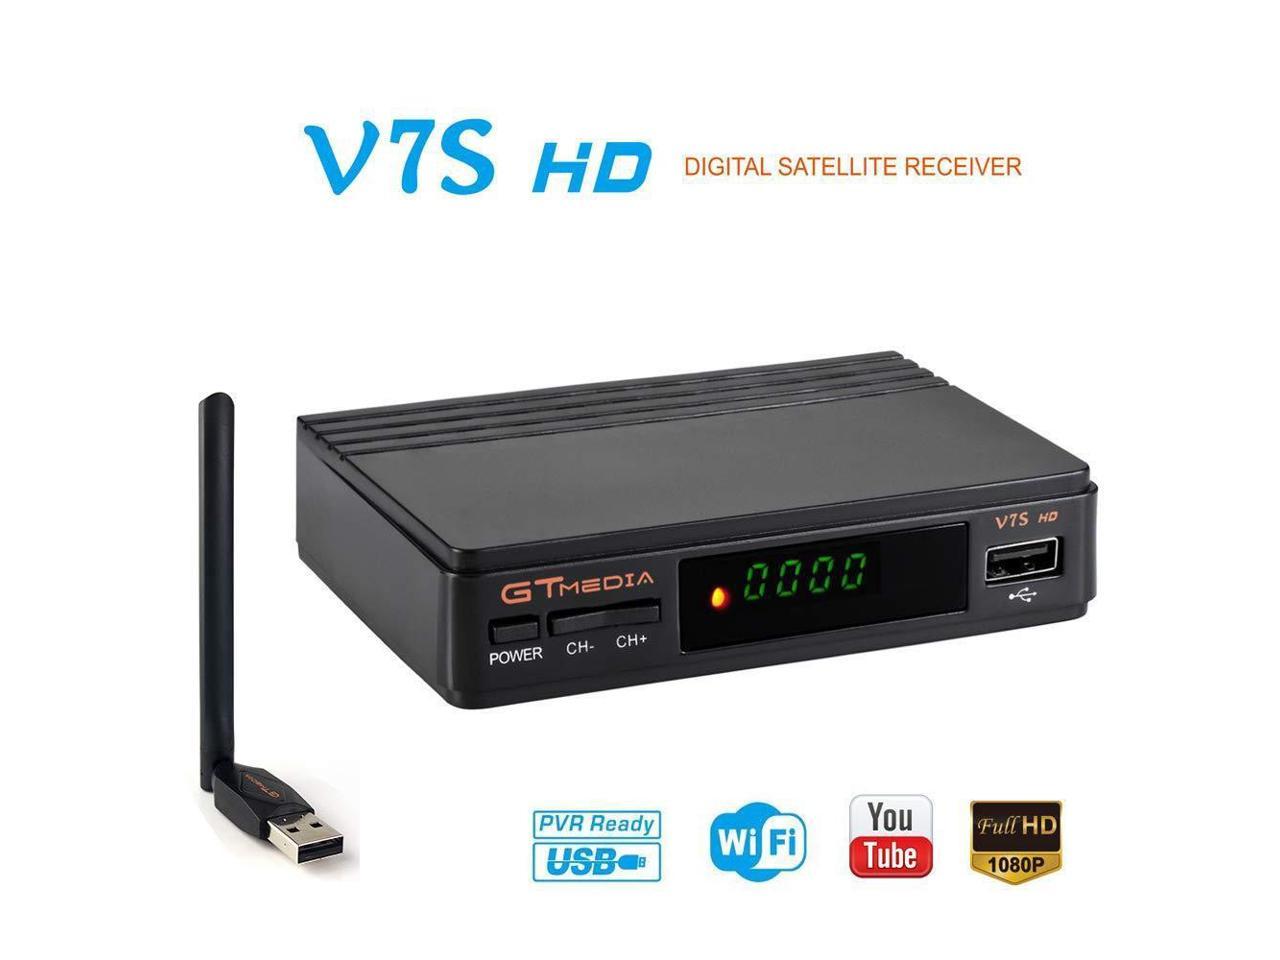 GT MEDIA V7 Plus Updated GT MEDIA V7 PRO Free to air Digital Satellite Receiver FTA DVB-S//S2//S2X with Antenna WiFi USB CA Card Slot Full HD 1080p H.265 HEVC 10bit Support YouTube CCcam autoBiss